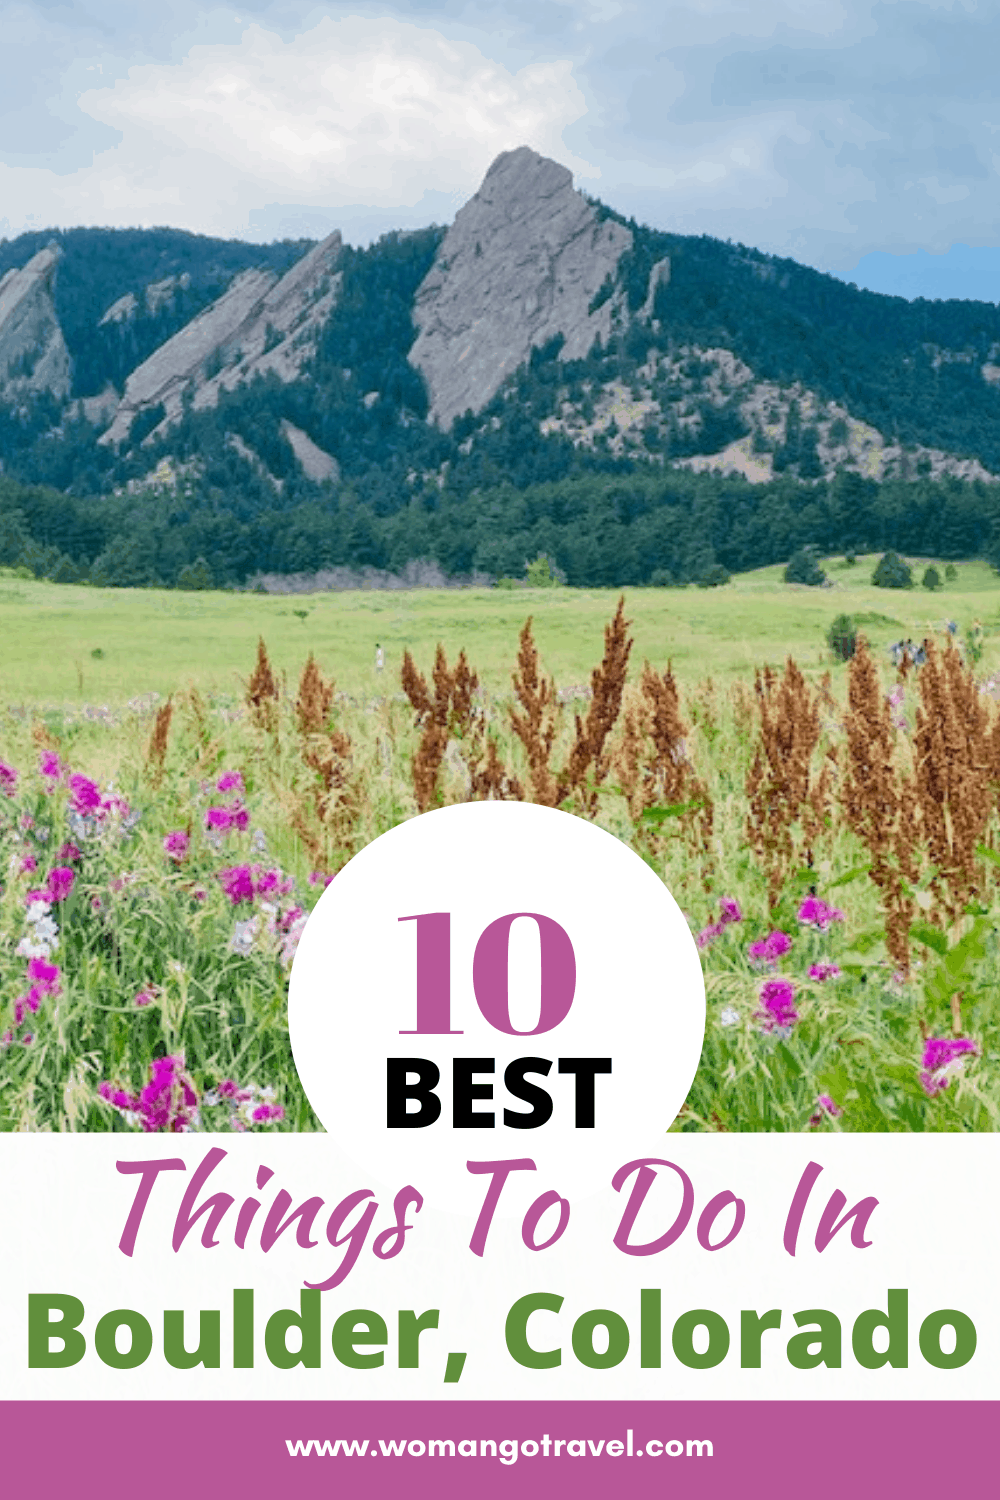 Best Things To Do in Boulder, Colorado_WomanGoTravel